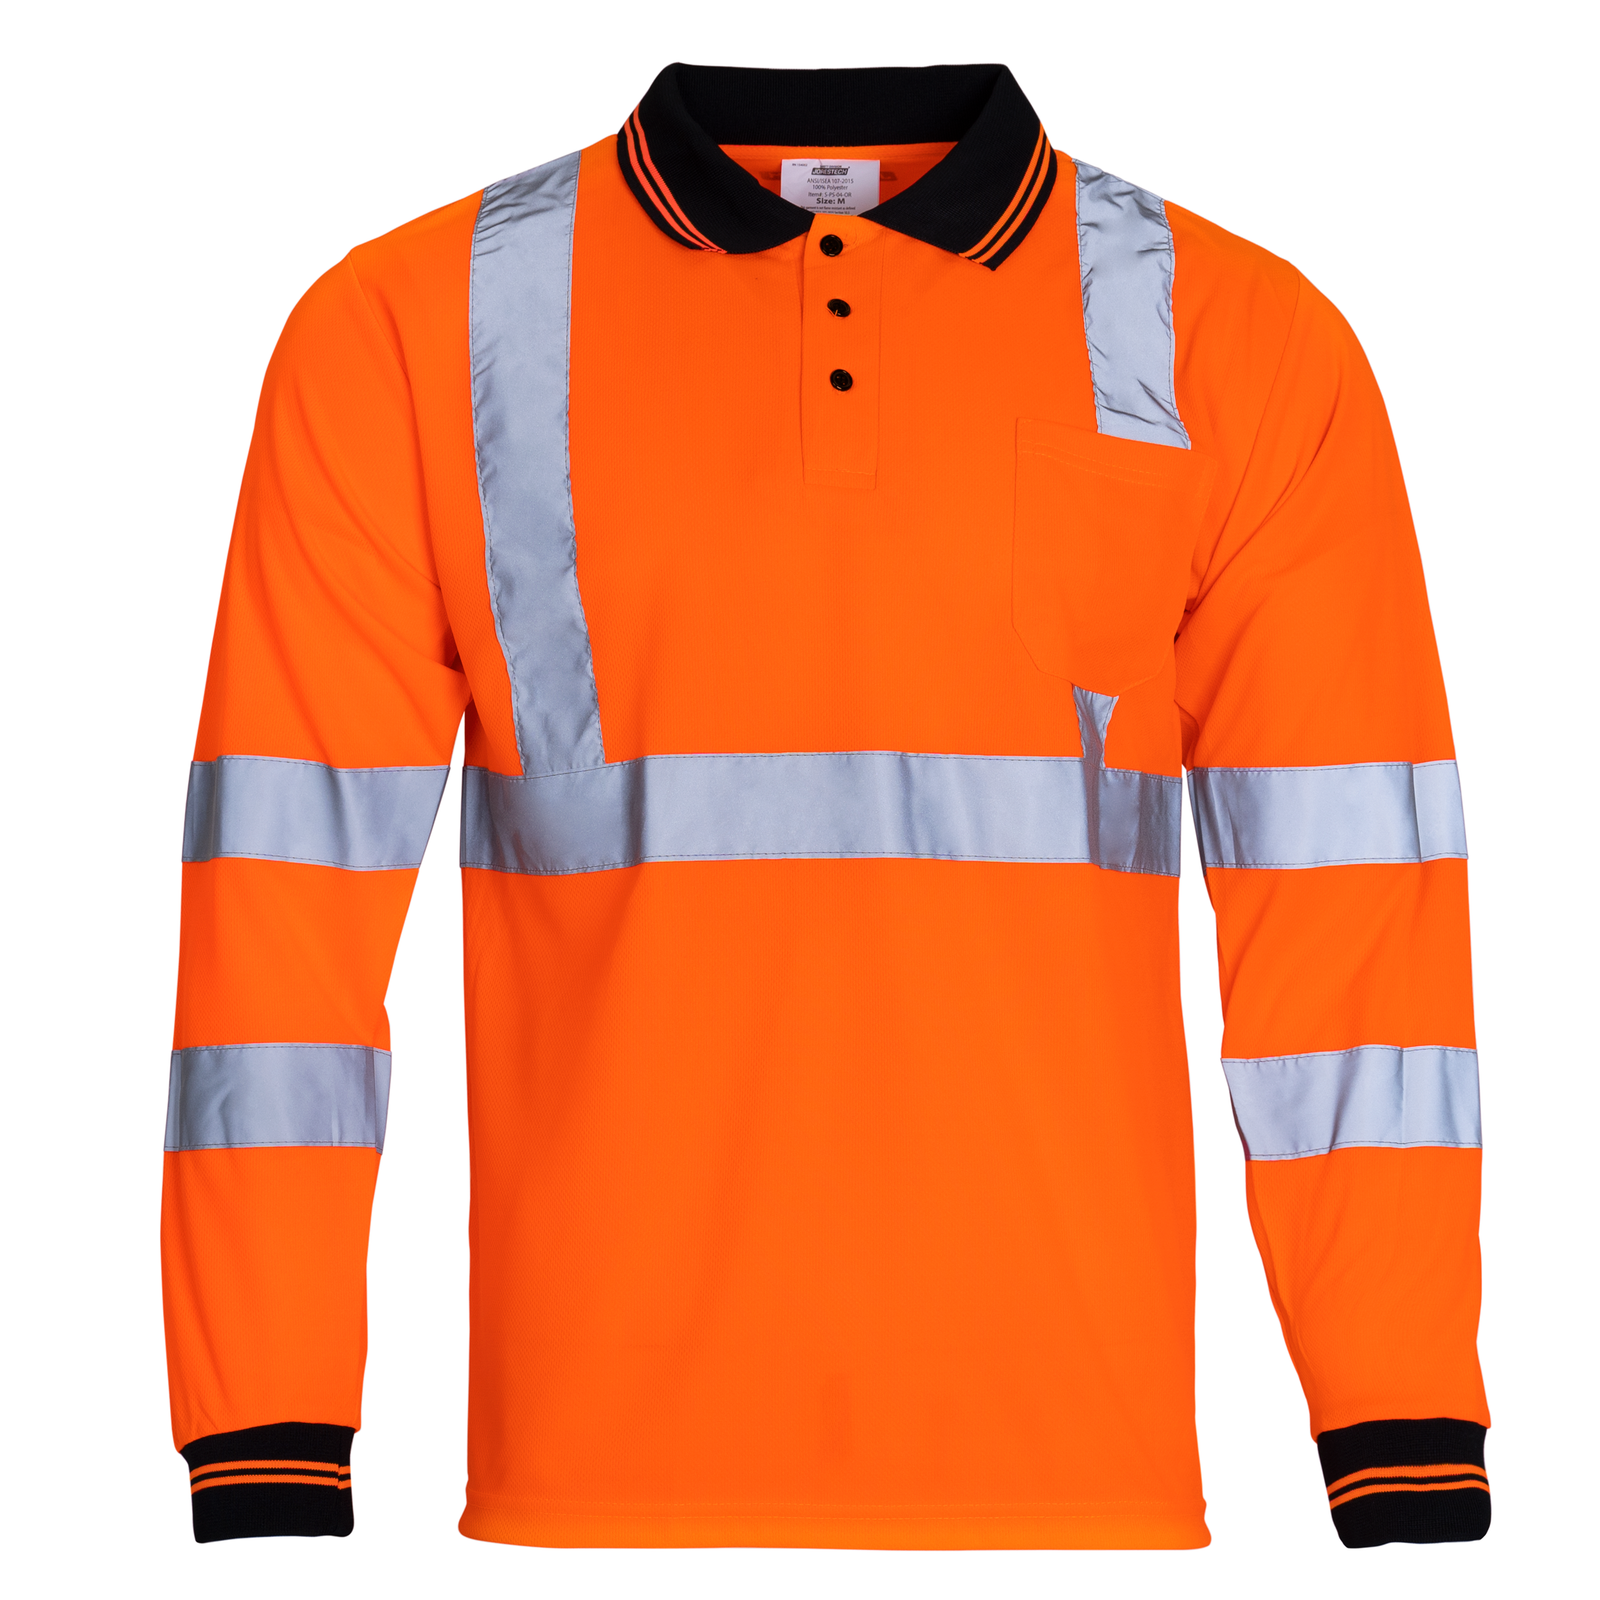 Front of the fluorescent orange high visibility safety shirt long sleeve polo shirt class 3 type R